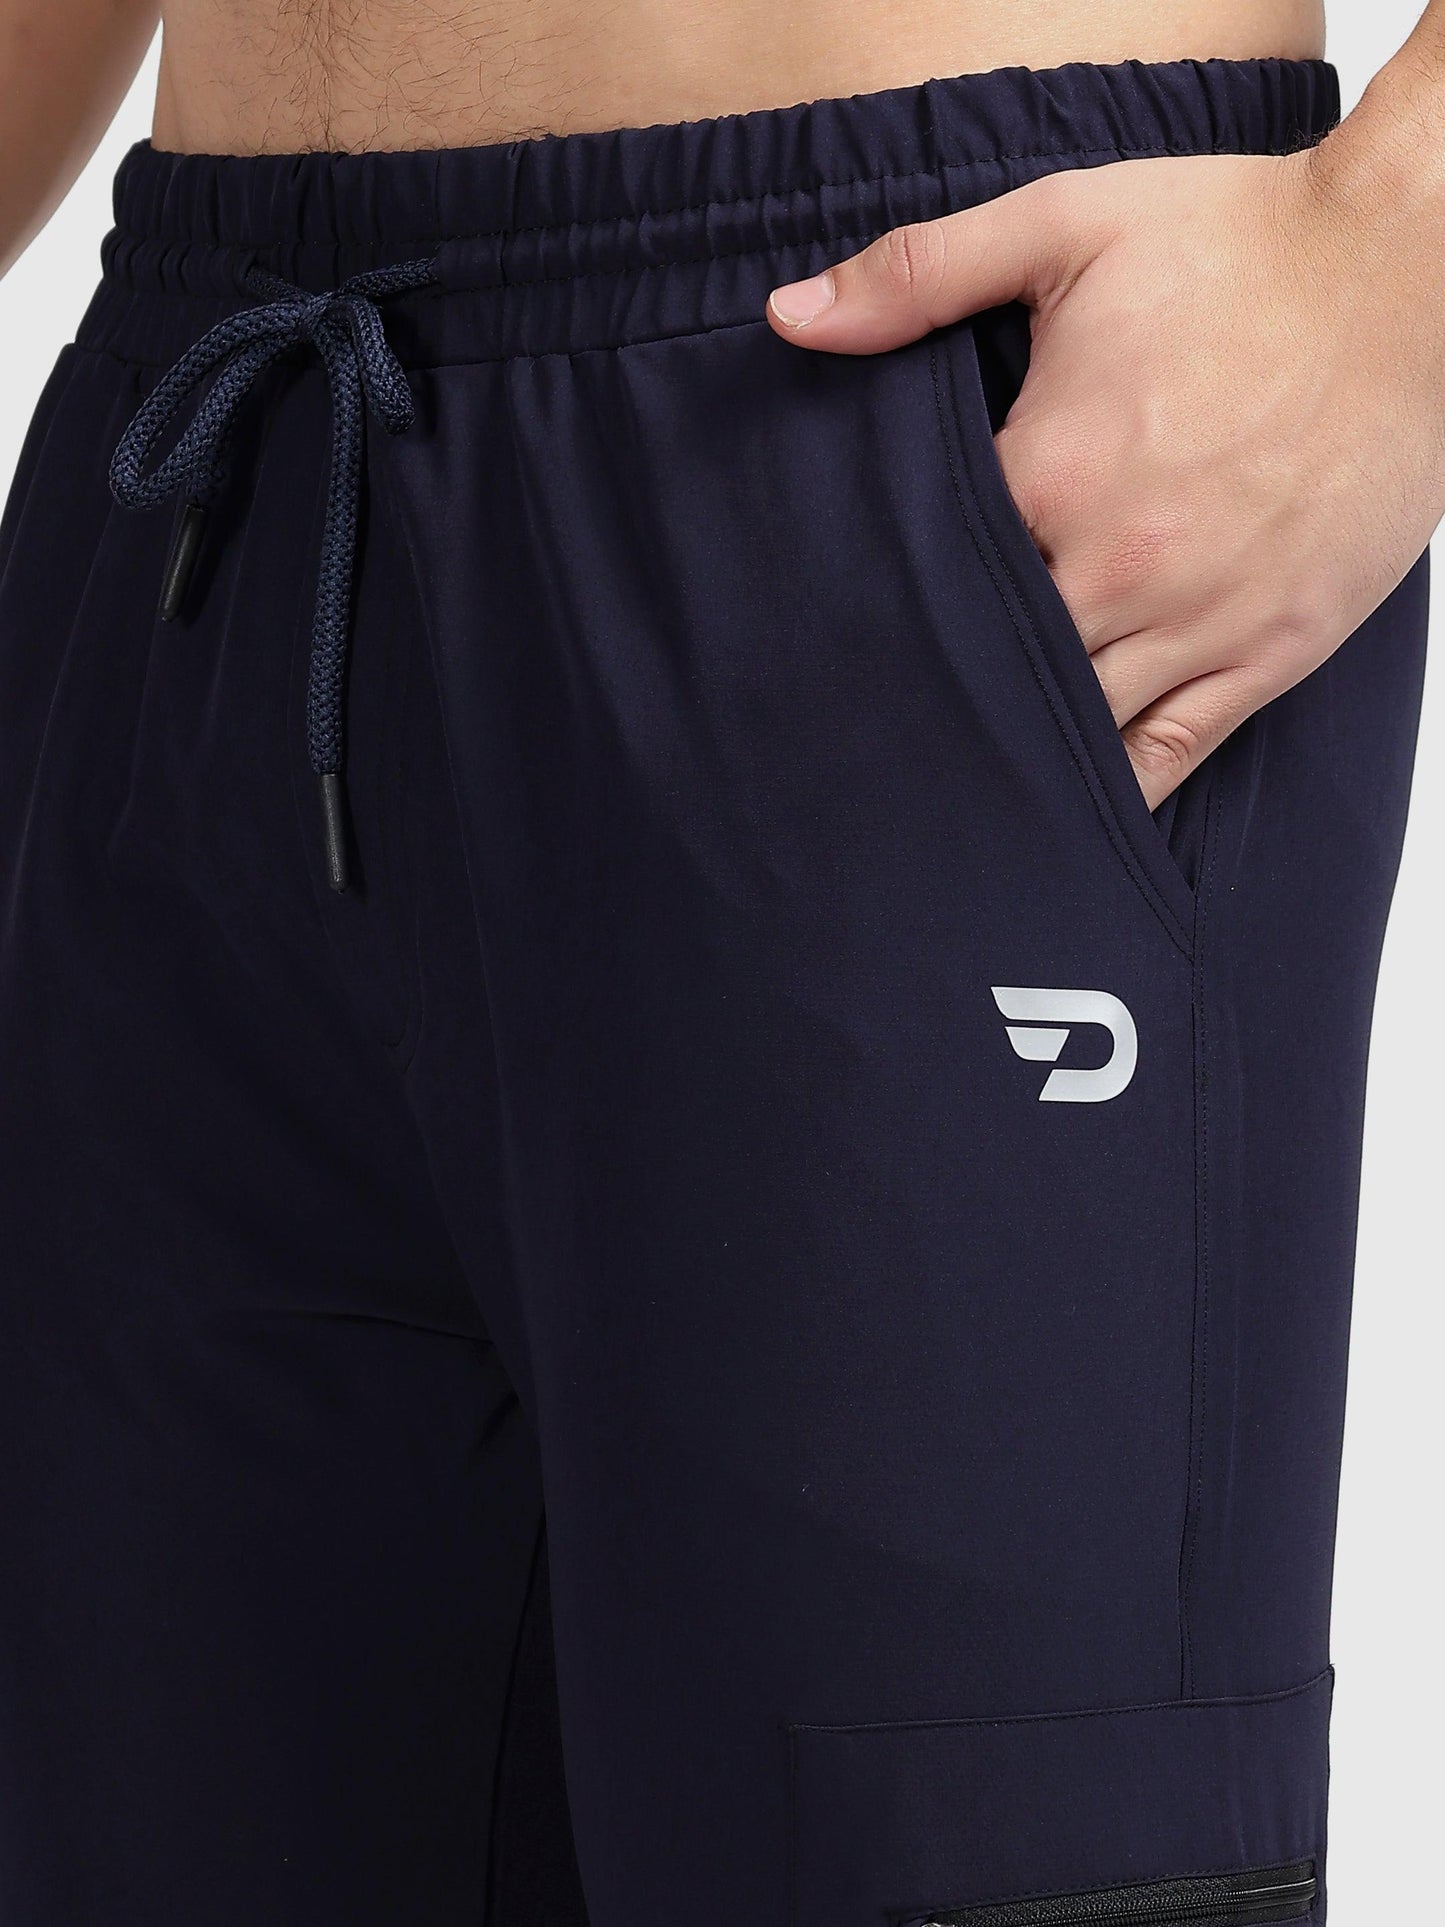 Denmonk: Elevate your look with these Trekcrago sharp midnight navy Trackpant for mens.